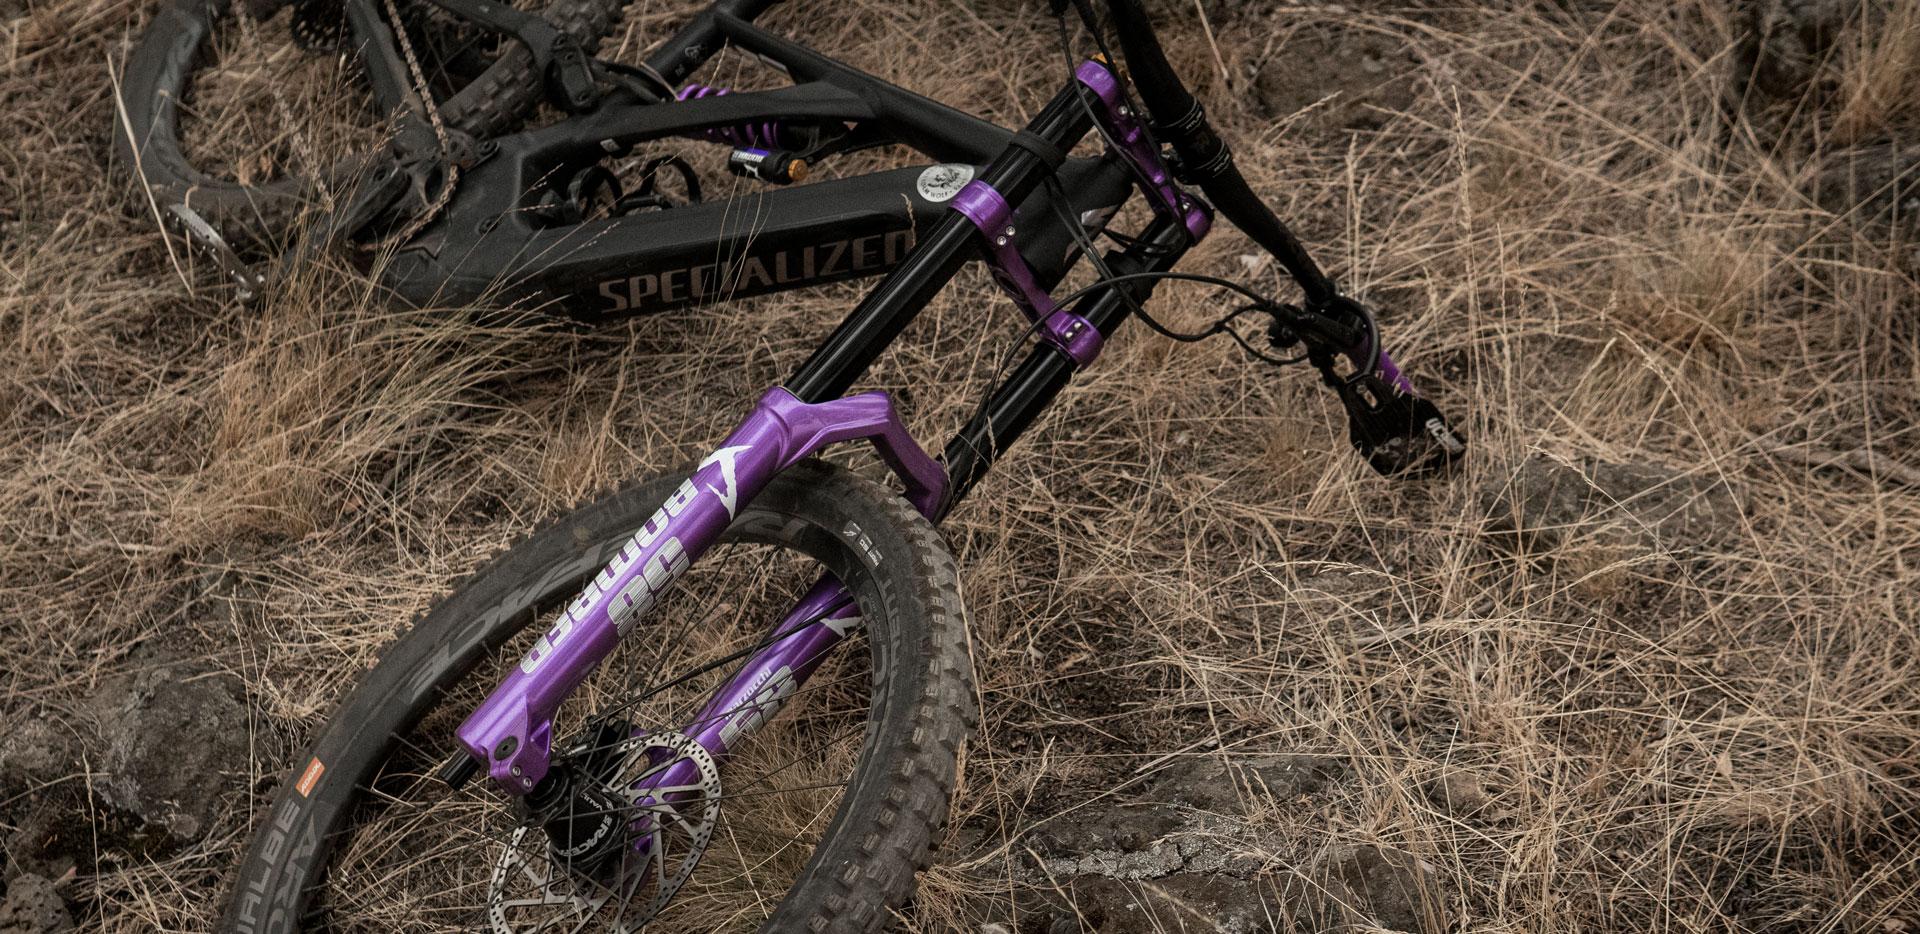 Marzocchi Bomber 58 Fork Review